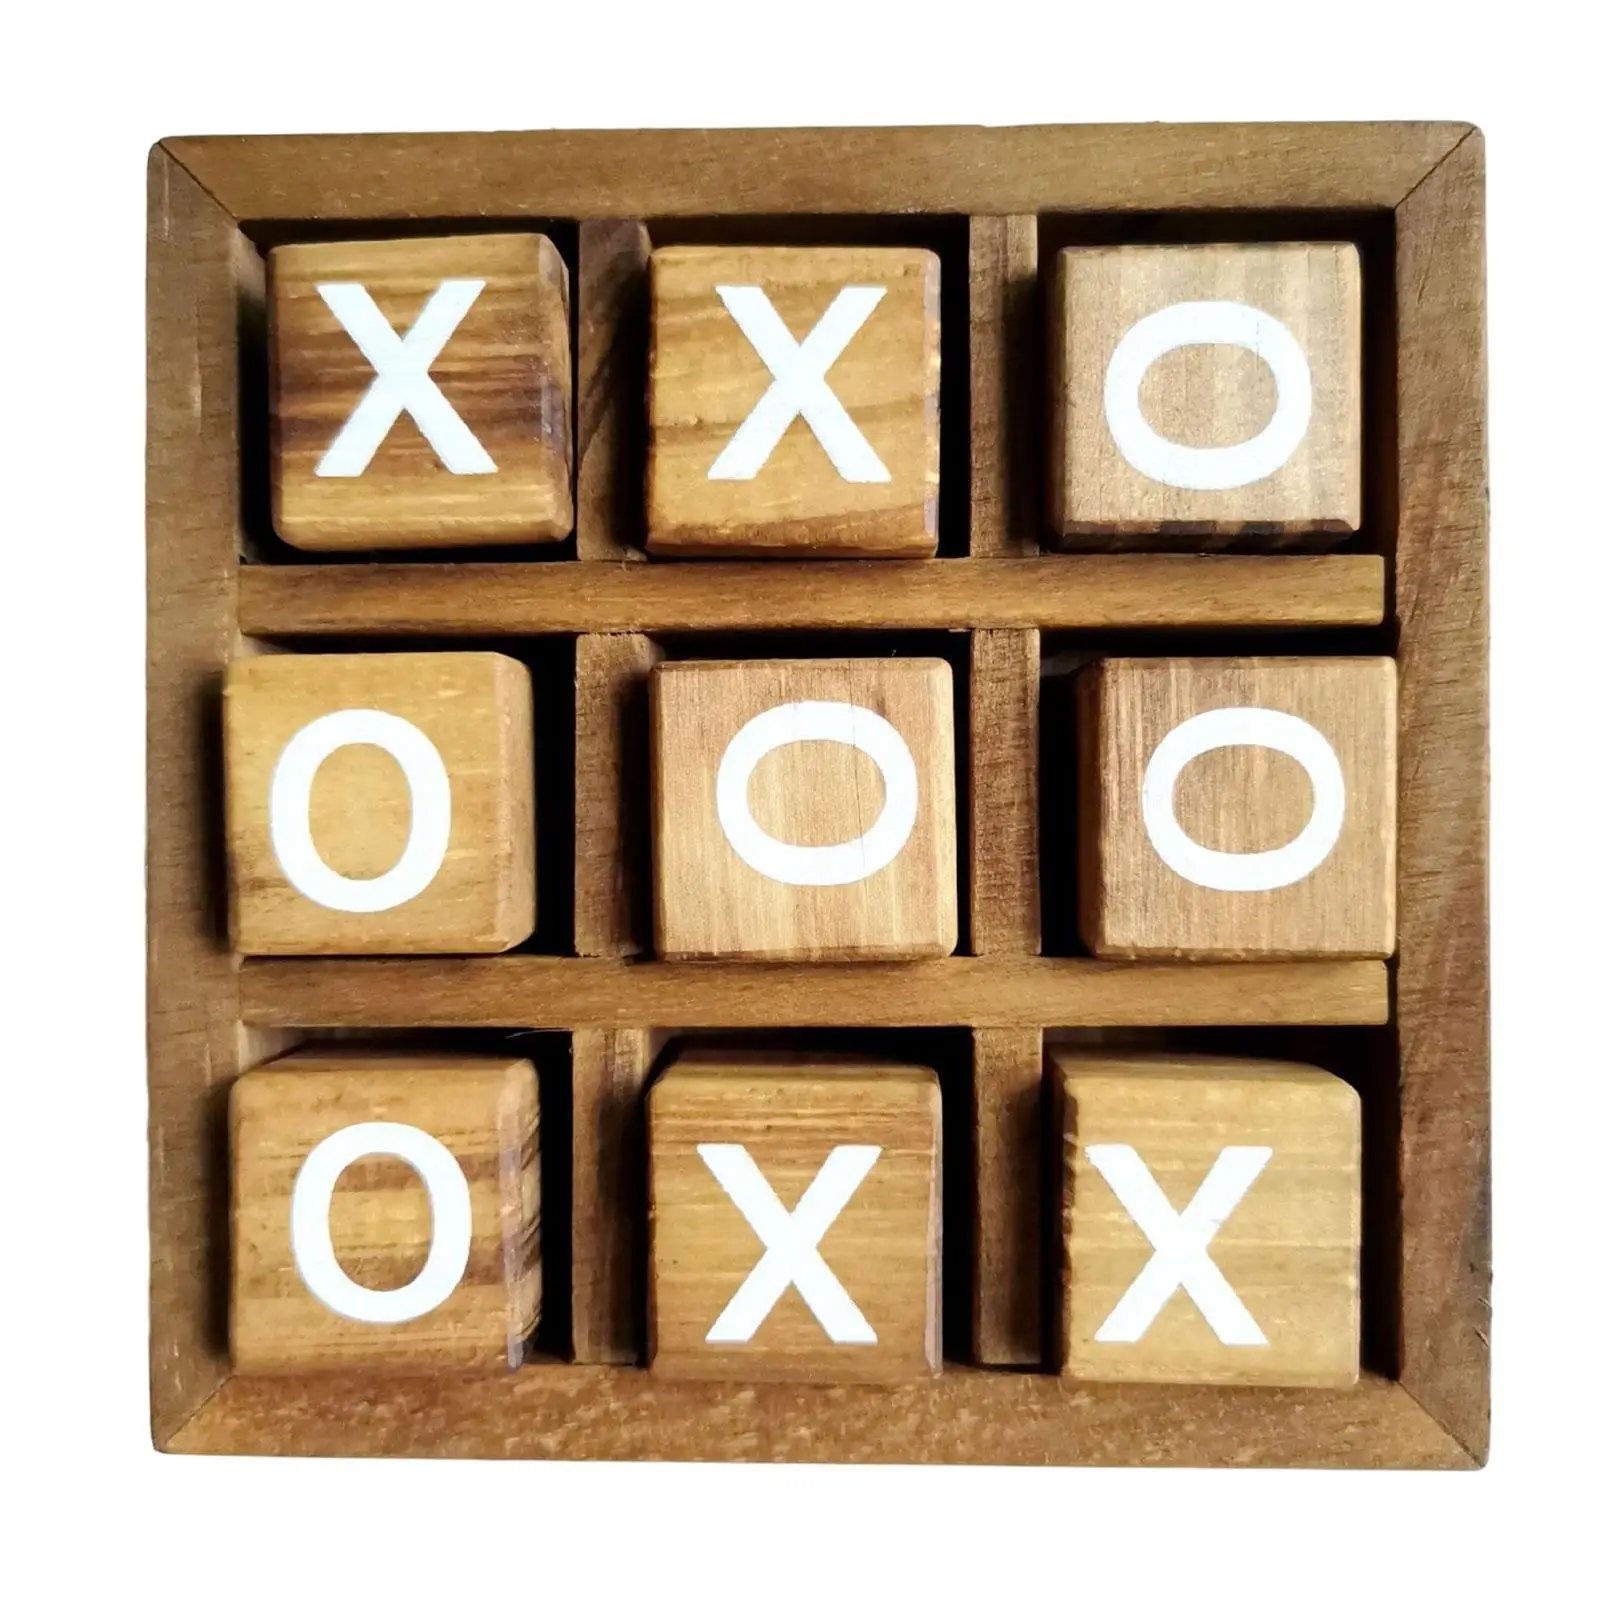 Wooden Tic TAC Toe Game Board Games Fun Indoor Brain Teaser Travel for Friends Top